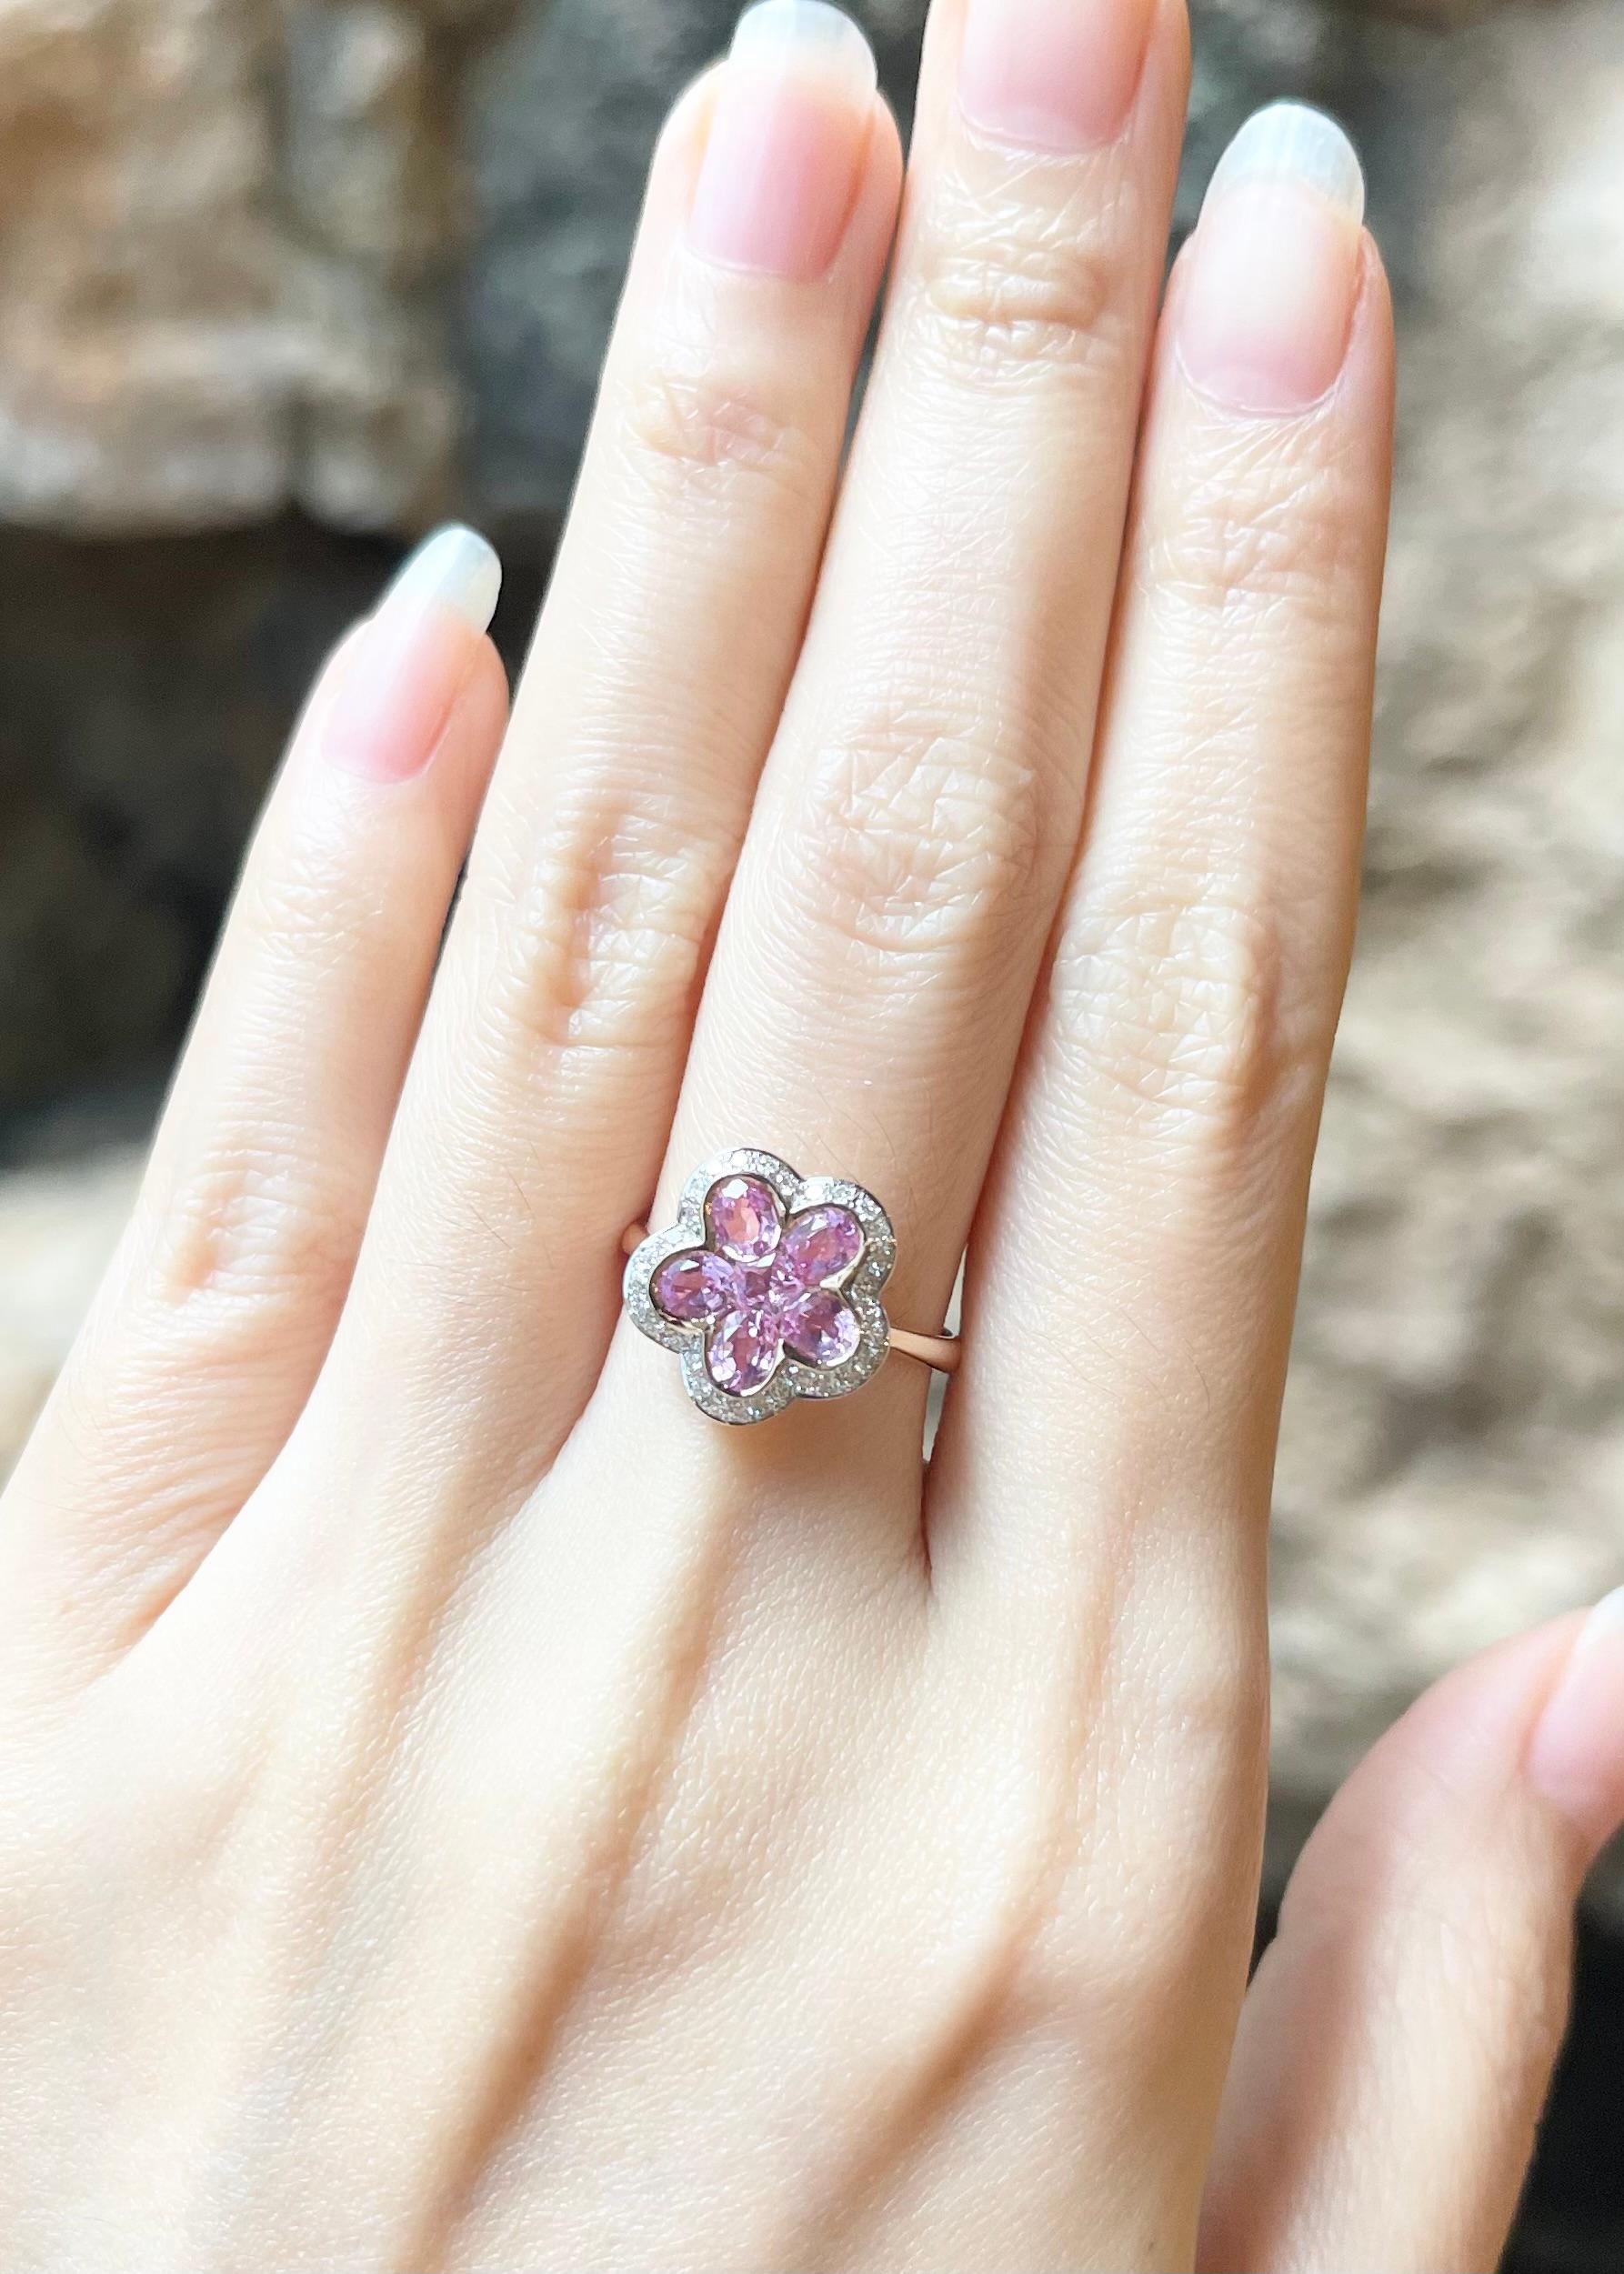 Pink Sapphire 1.25 carats with Diamond 0.17 carat Ring set in 18K Rose Gold Settings

Width:  1.2 cm 
Length: 1.2 cm
Ring Size: 52
Total Weight: 5.34 grams

